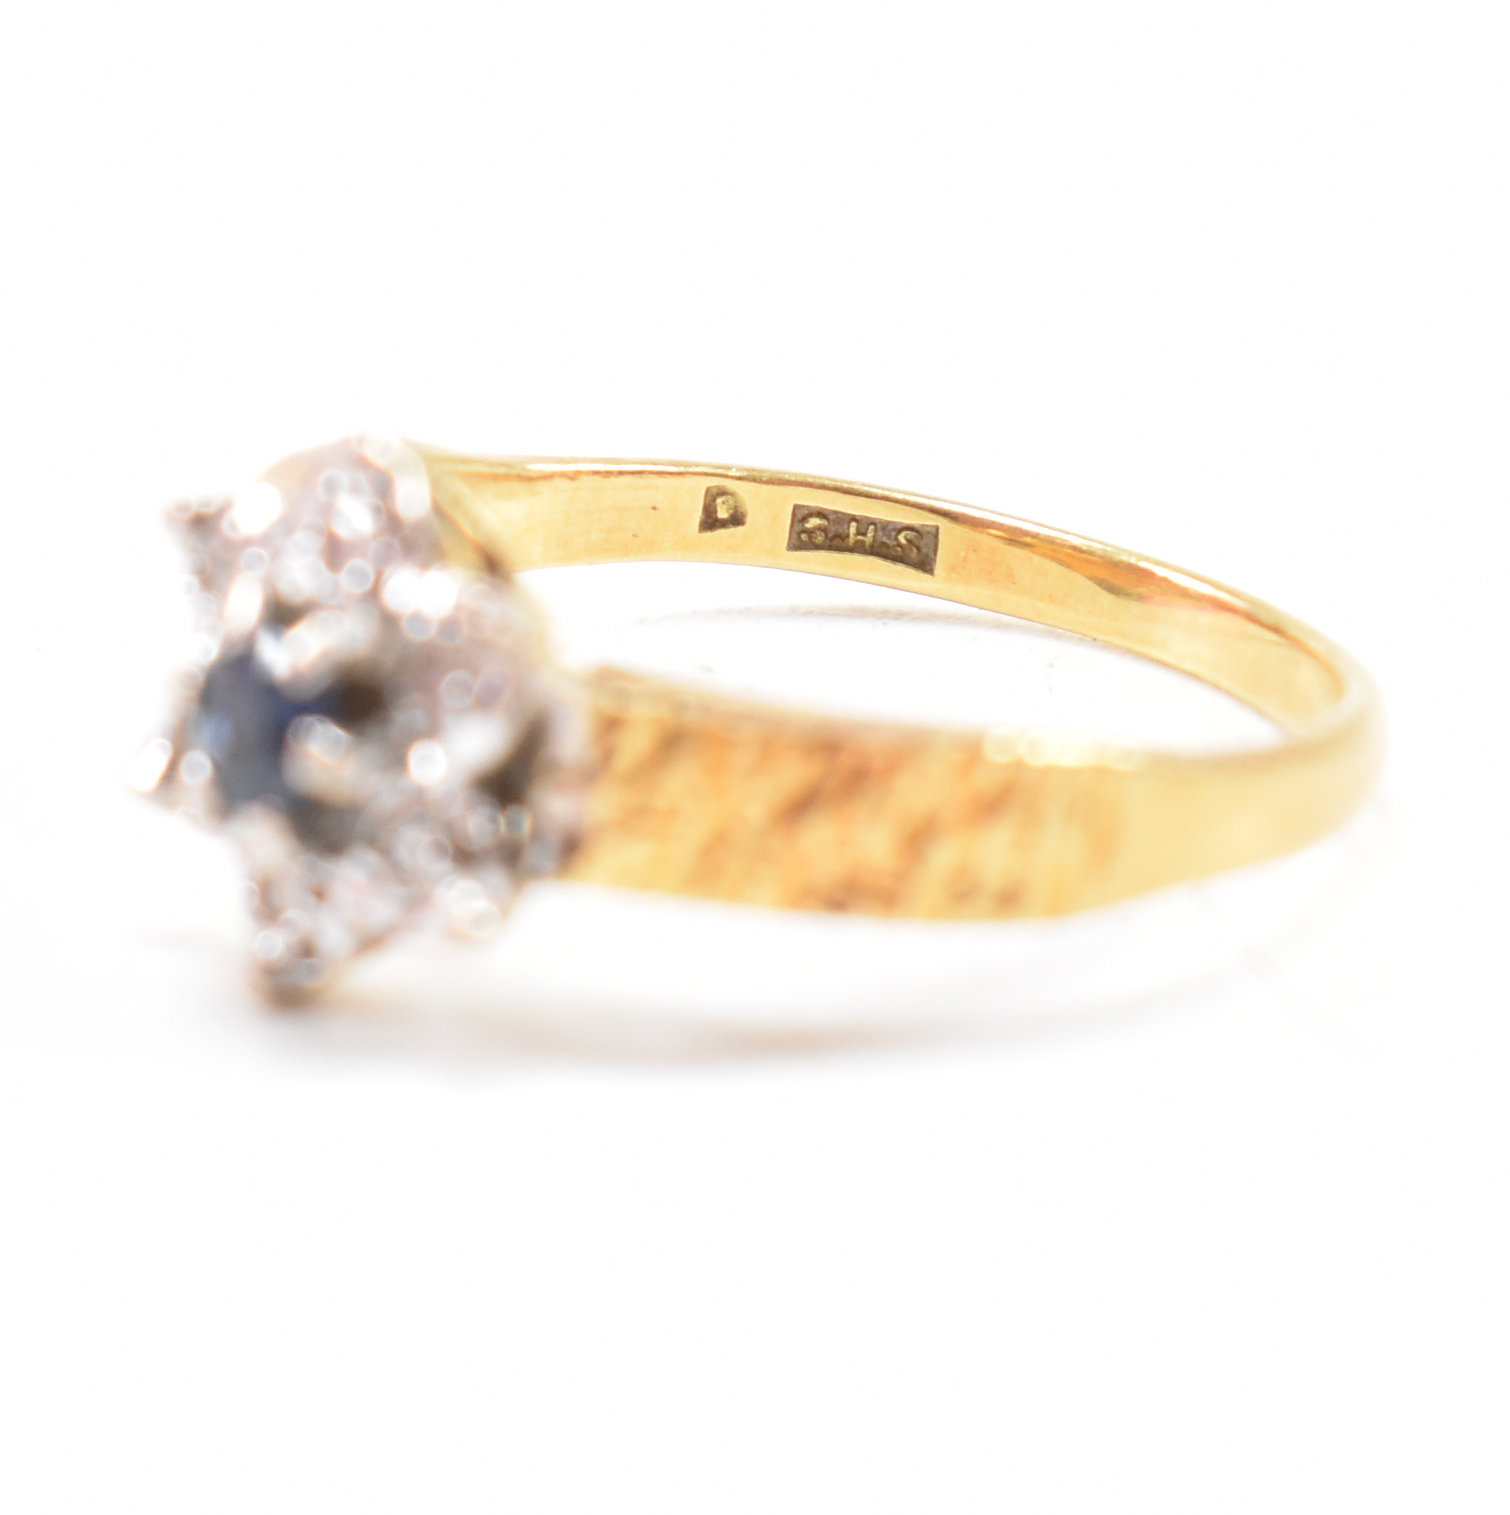 HALLMARKED 18CT GOLD SAPPHIRE CLUSTER RING - Image 6 of 9